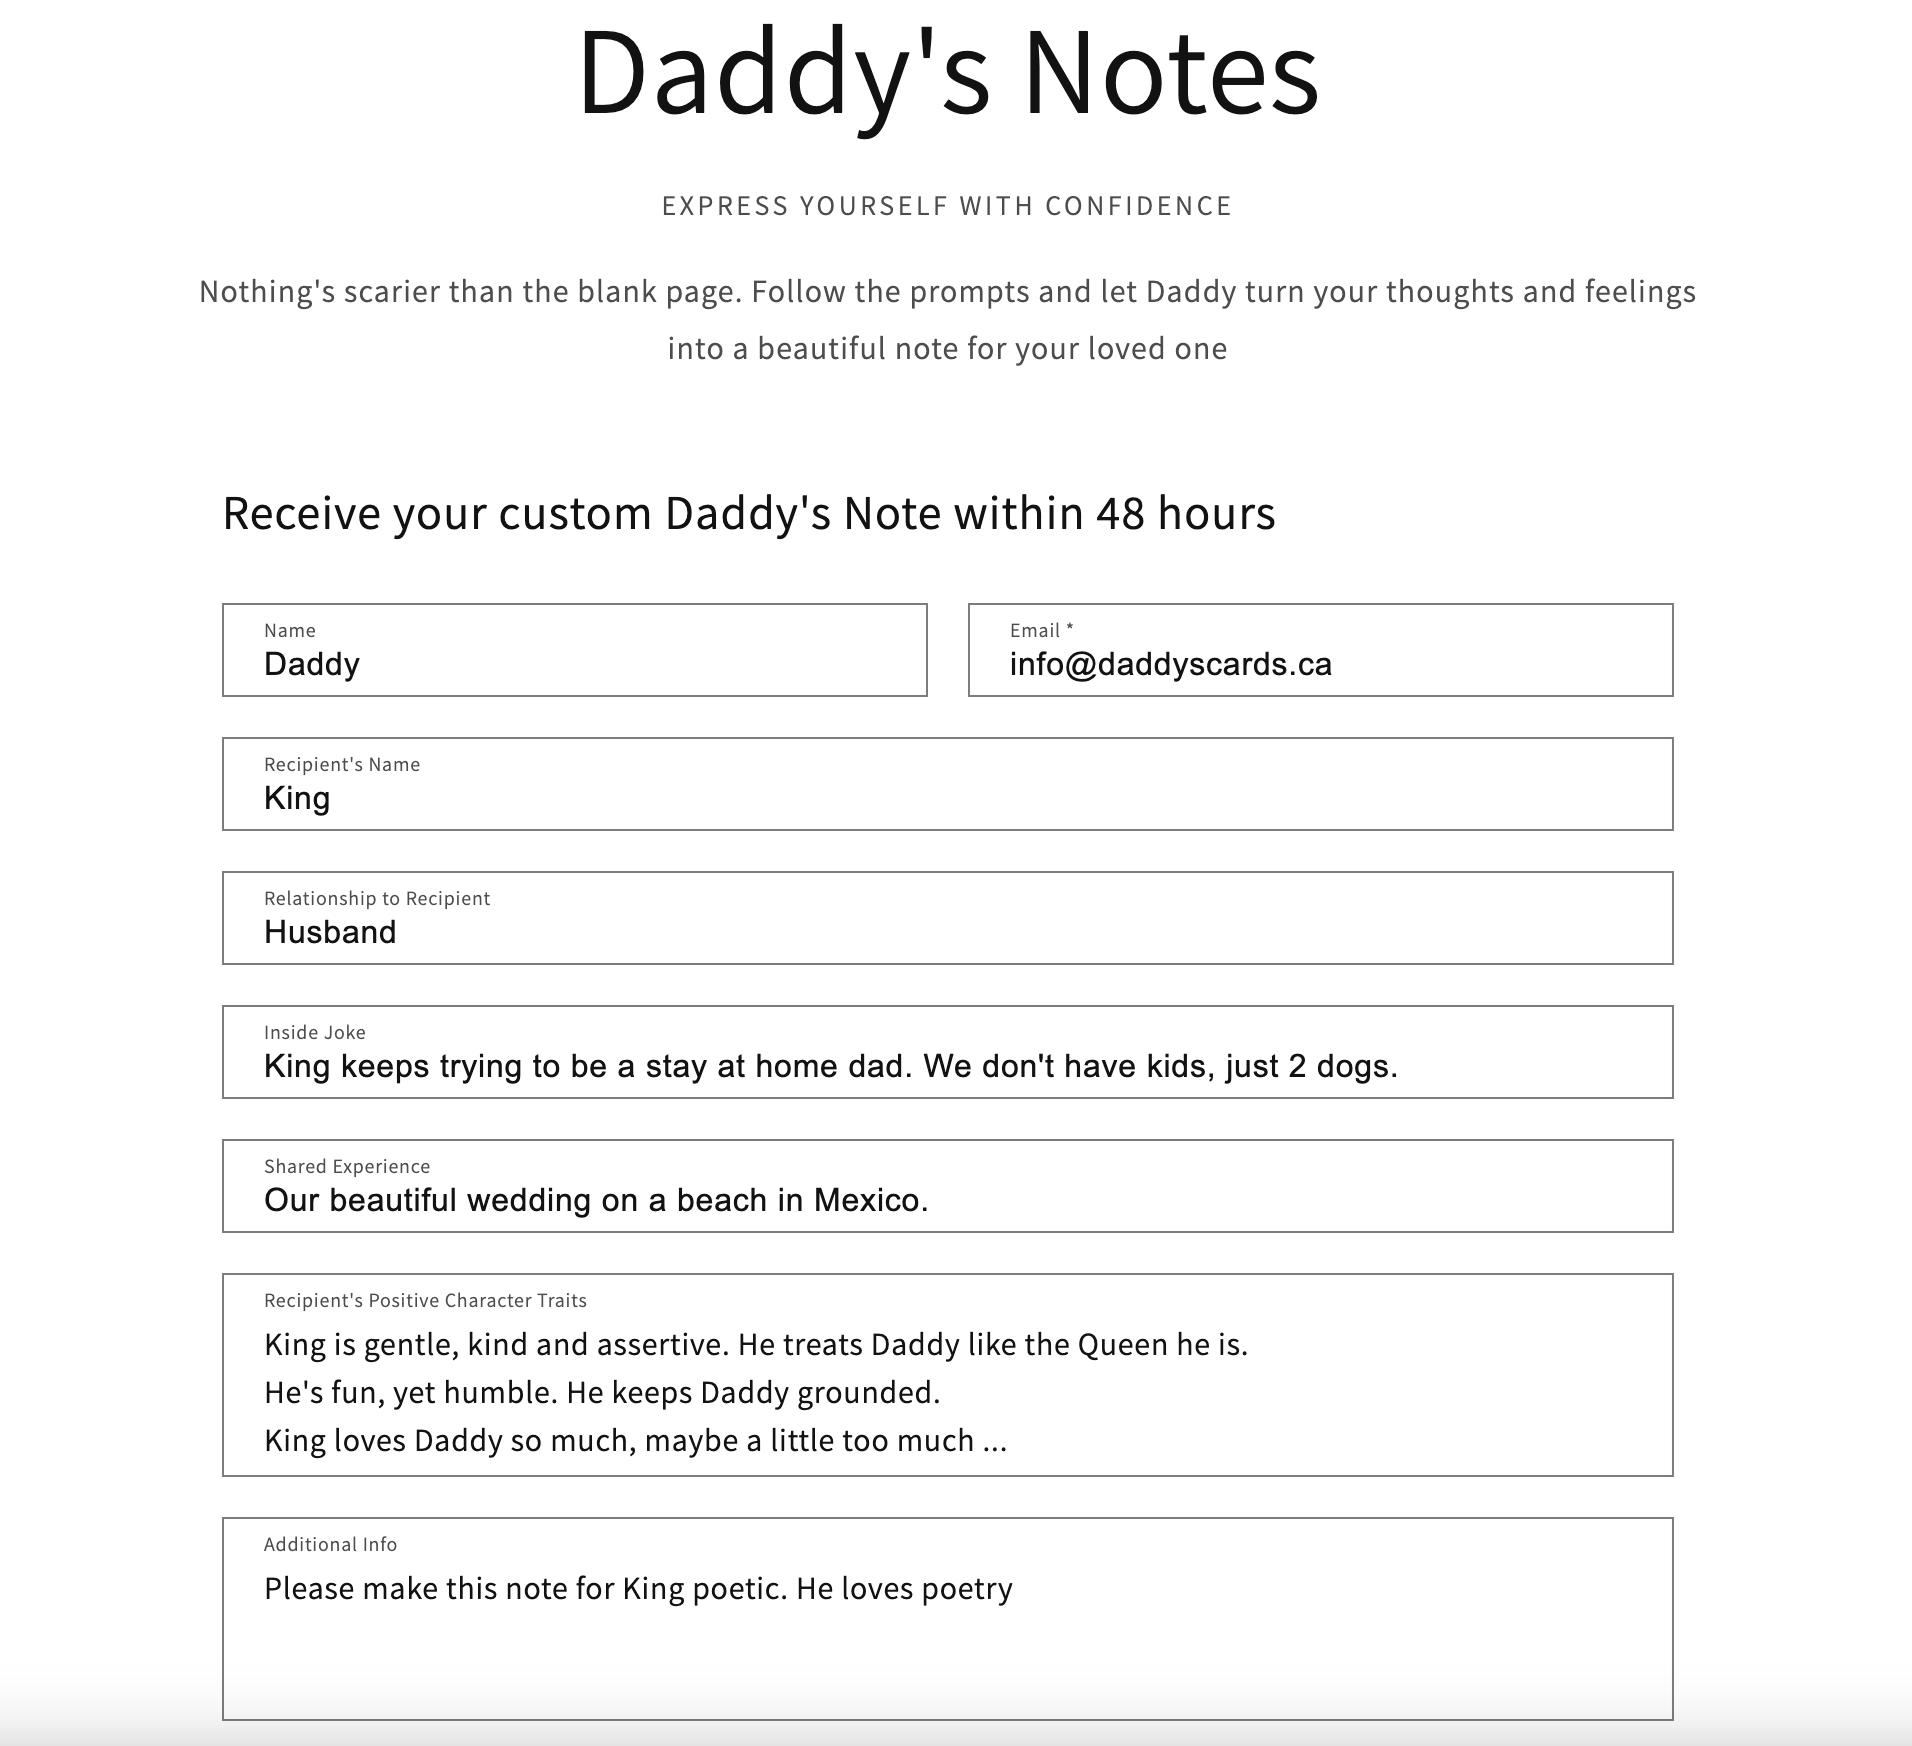 An example of how to fill in the prompts for Daddy's Notes. Daddy wants a note for his husband King